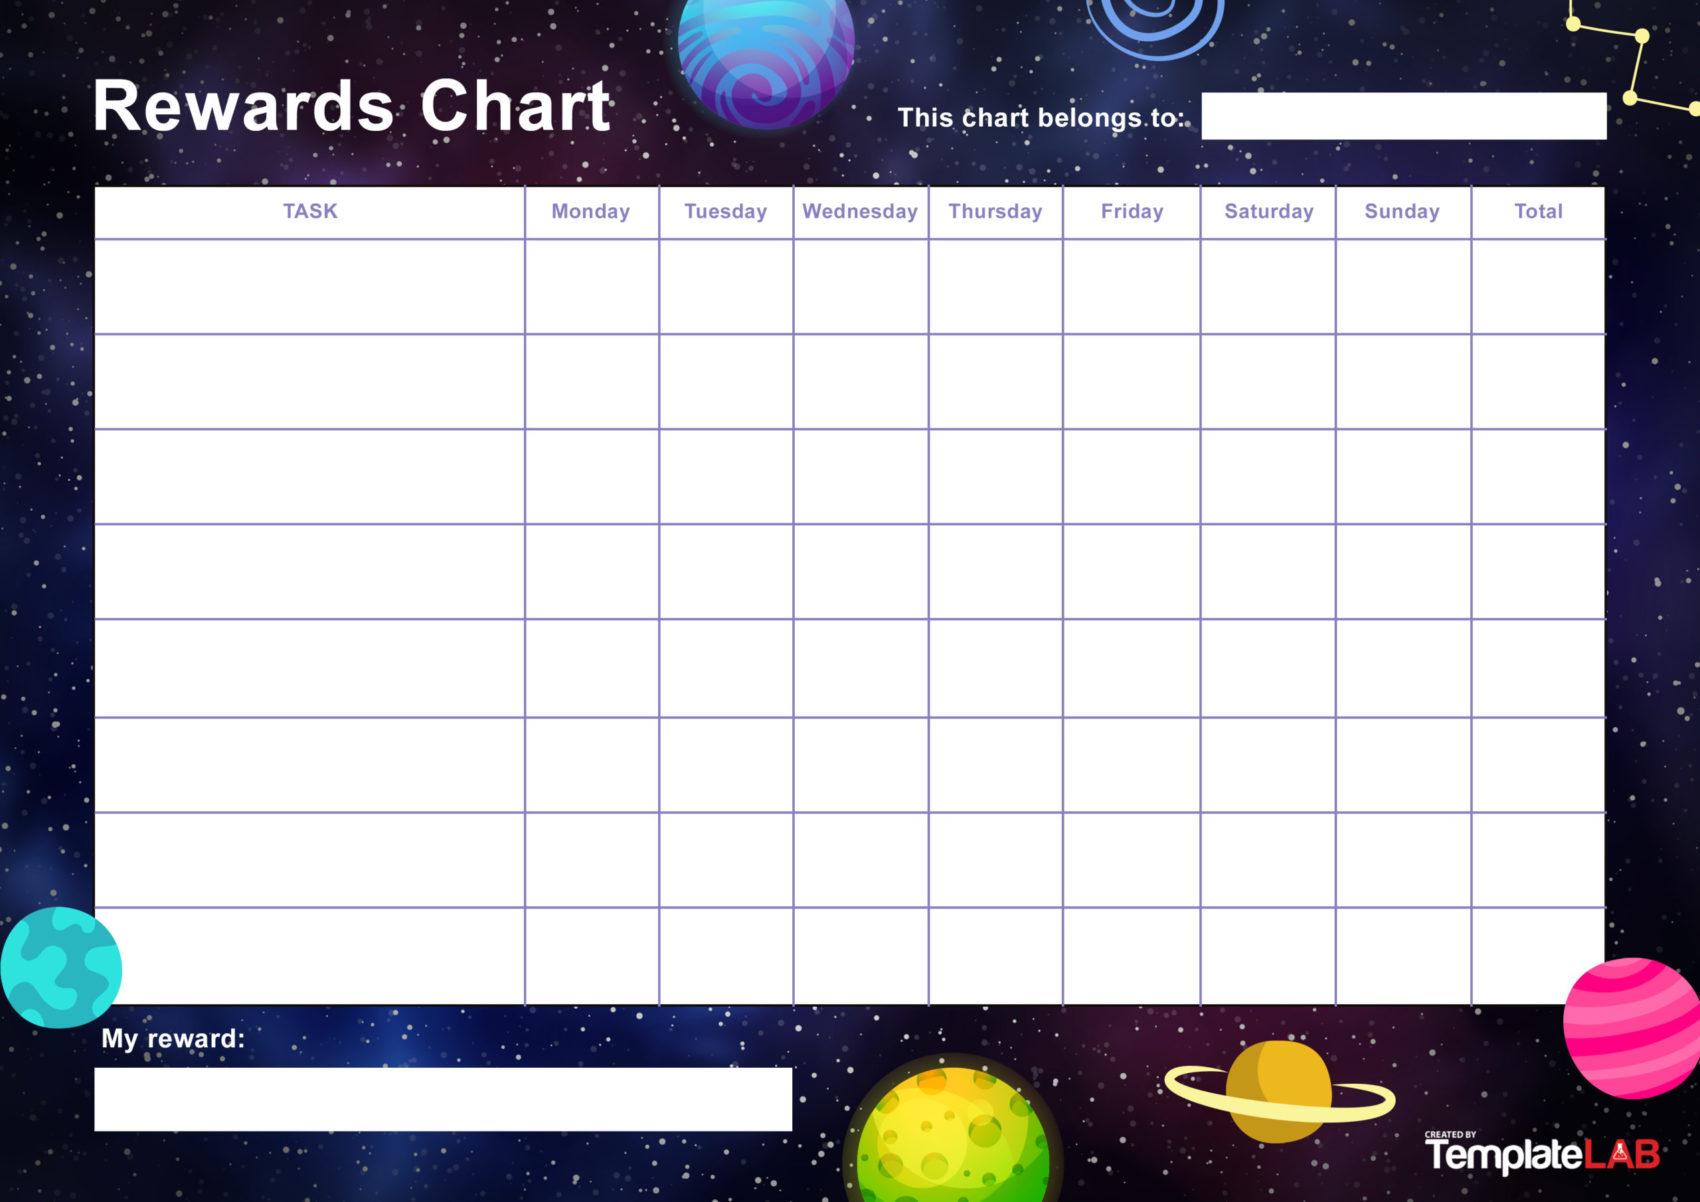 printable-redesigned-but-not-my-own-design-reward-chart-kids